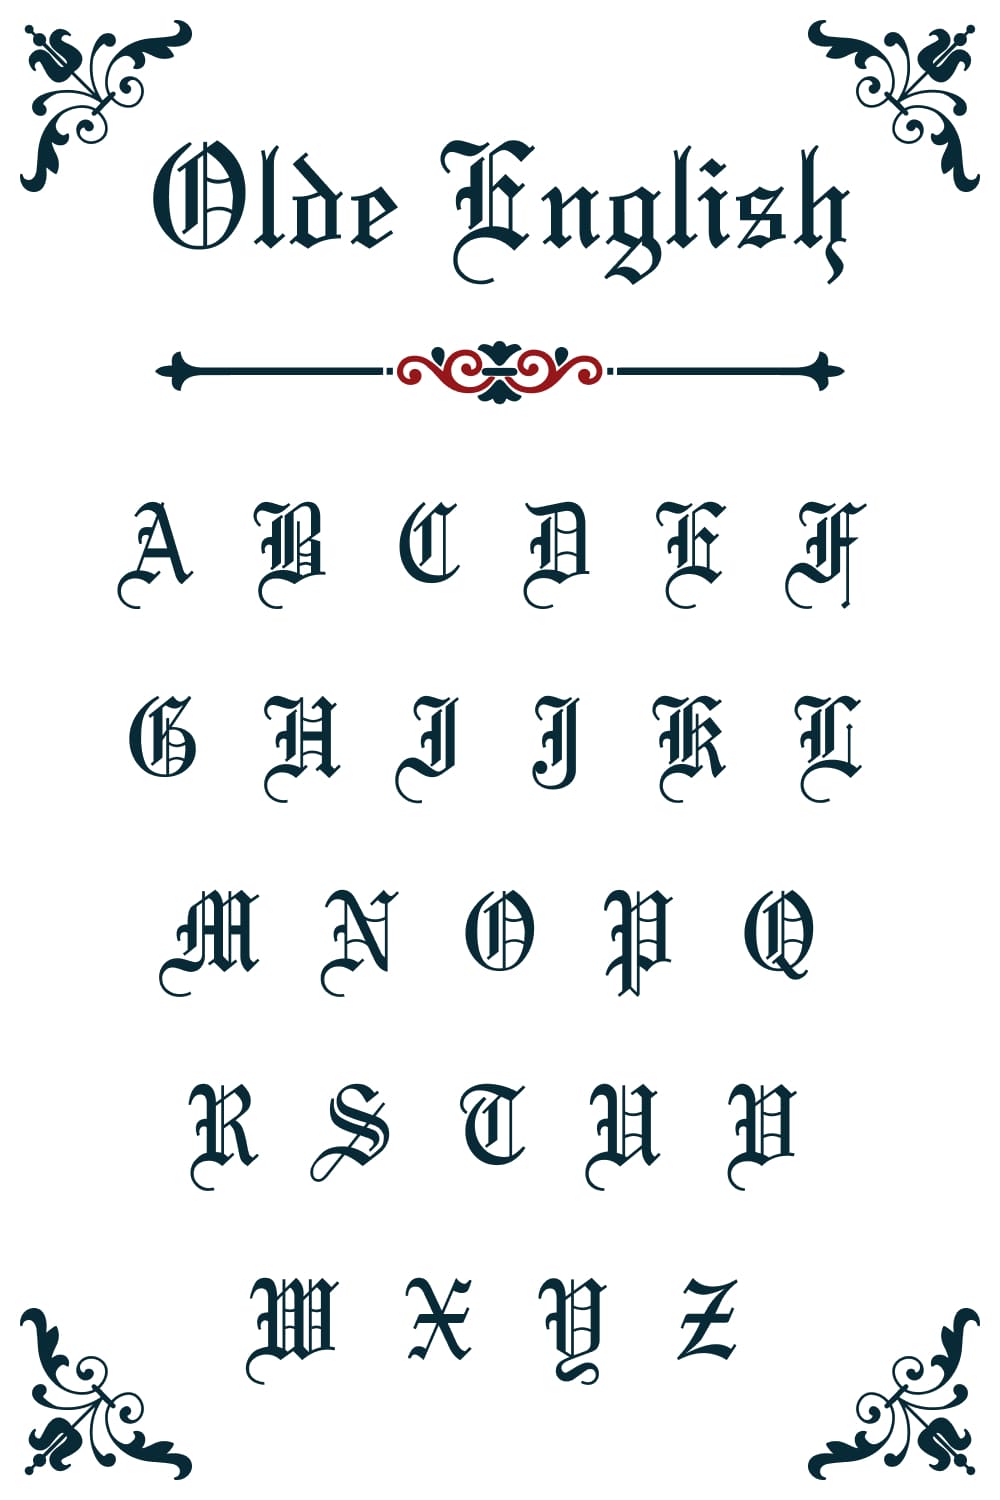 Pinterest preview charachters for Olde English - old english font free by MasterBundles.